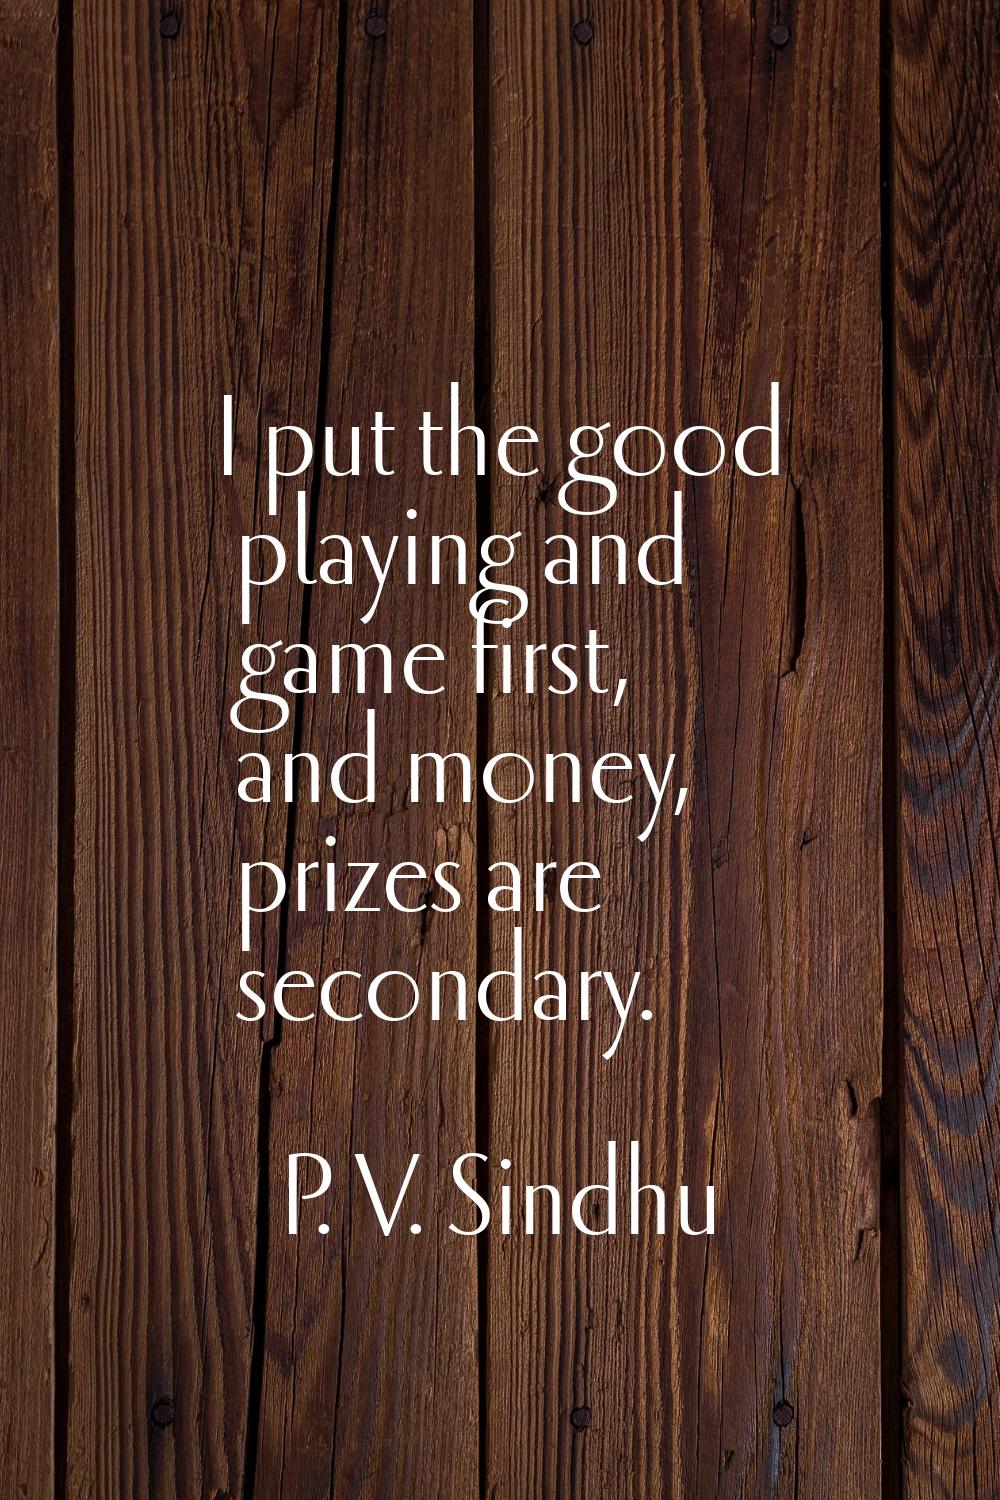 I put the good playing and game first, and money, prizes are secondary.